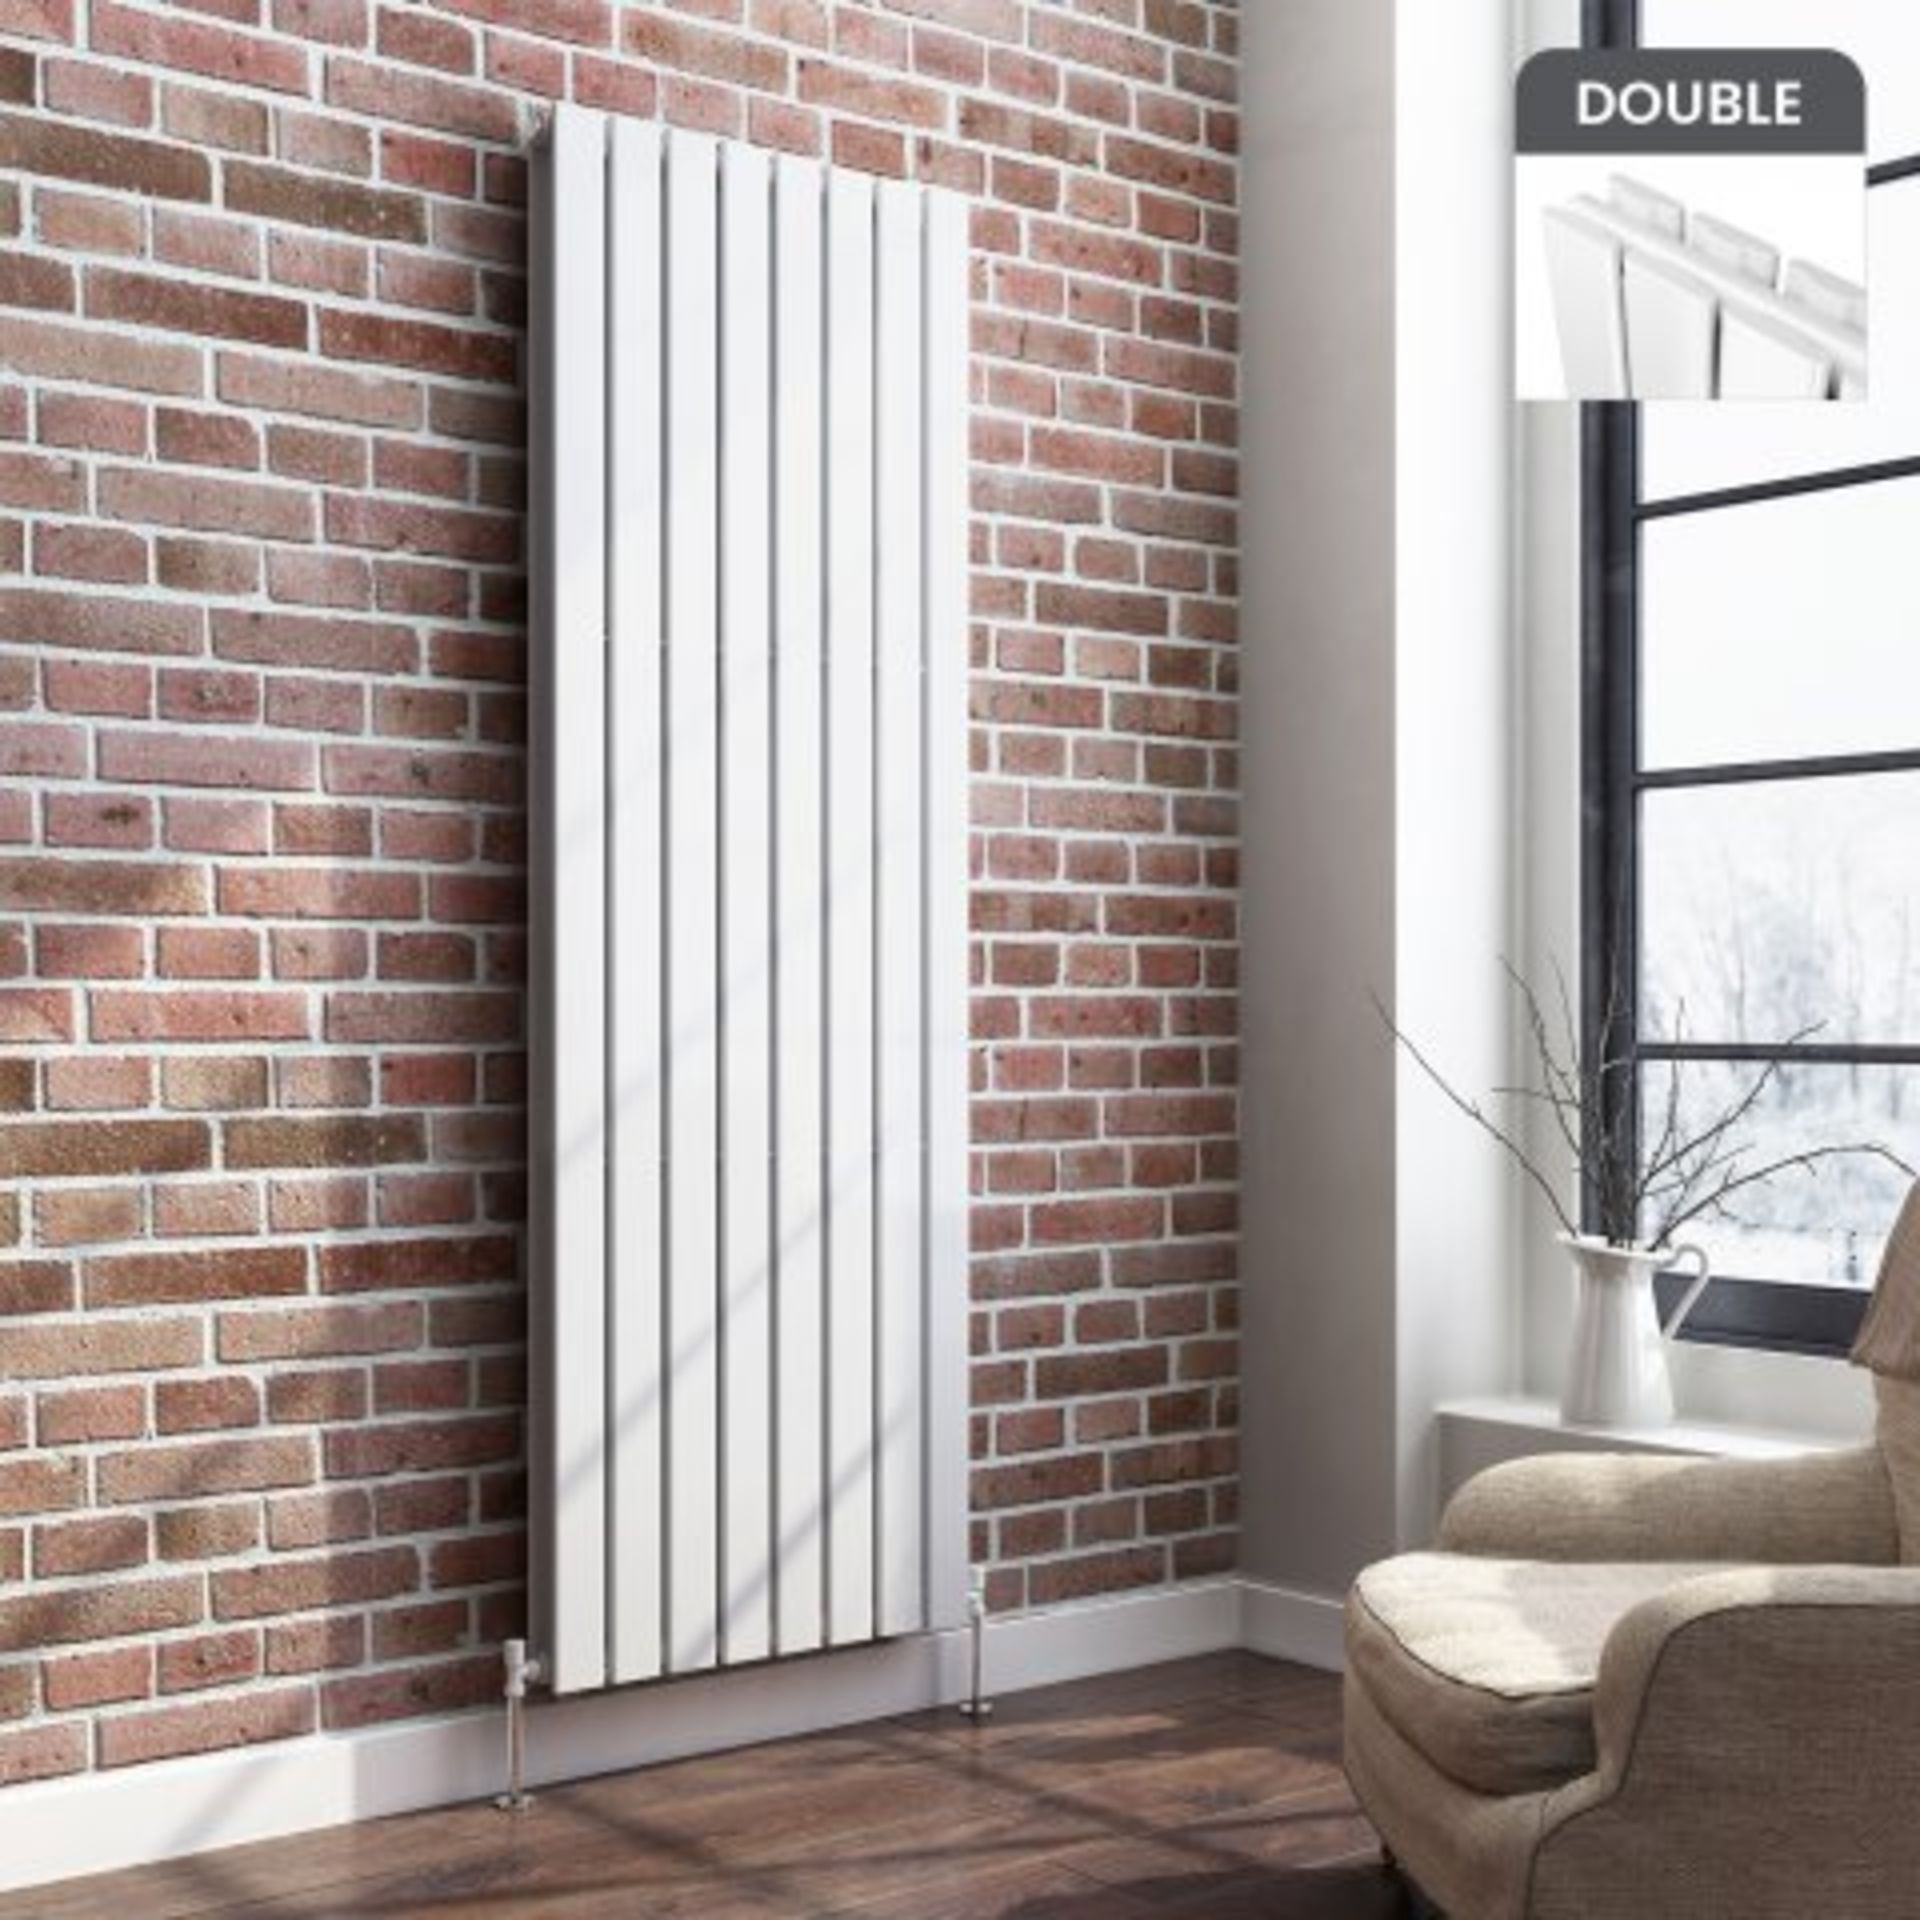 (I13) 1800x608mm Gloss White Double Flat Panel Vertical Radiator - Premium RRP £599.99. Attention to